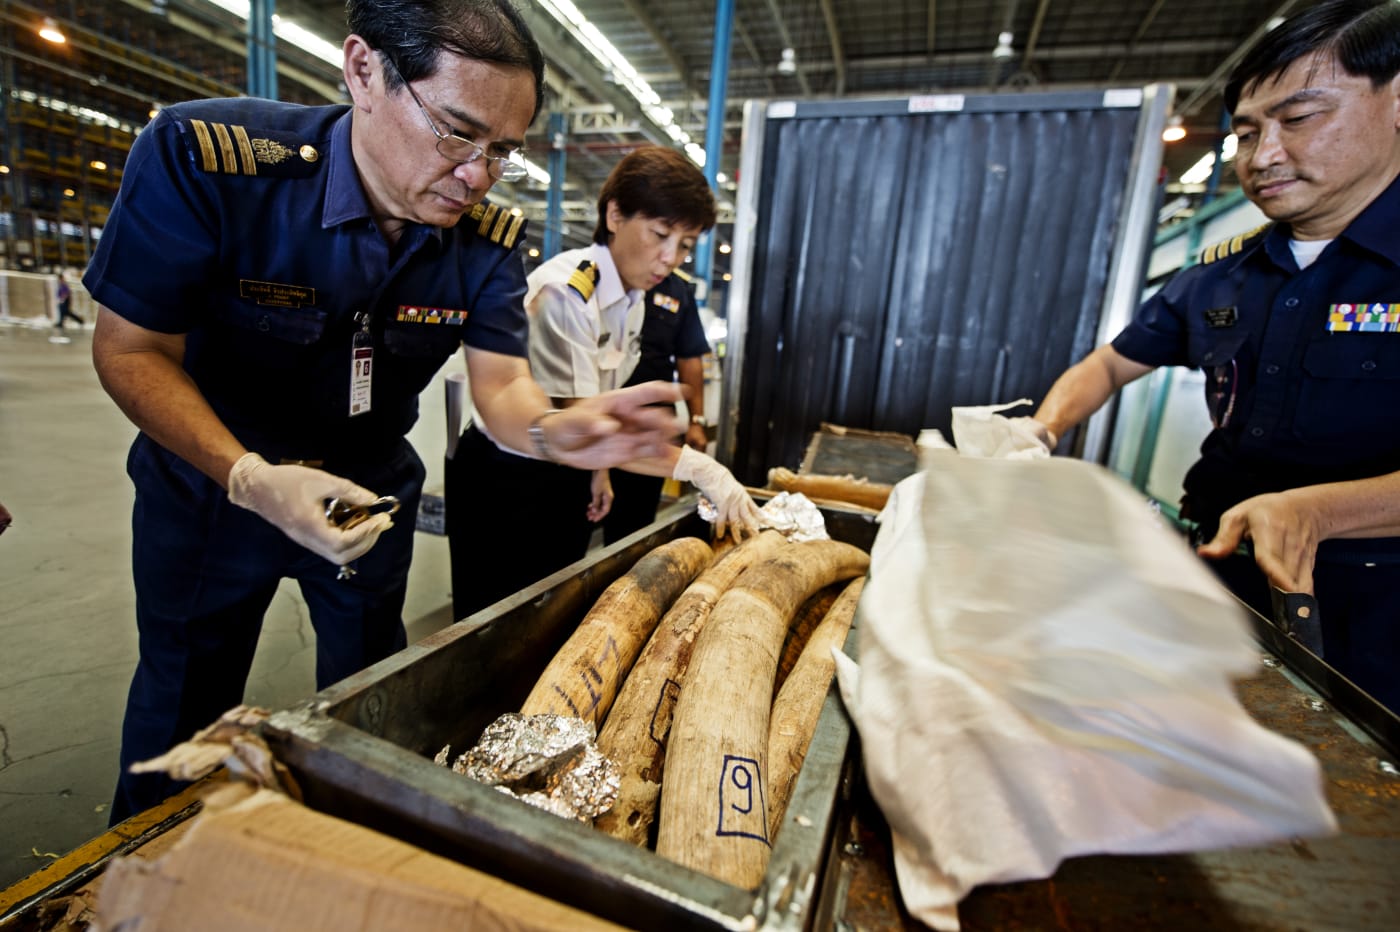 Customs officials in Suvarnabhumi discover a shipment of African elephant tusks from Mozambique.